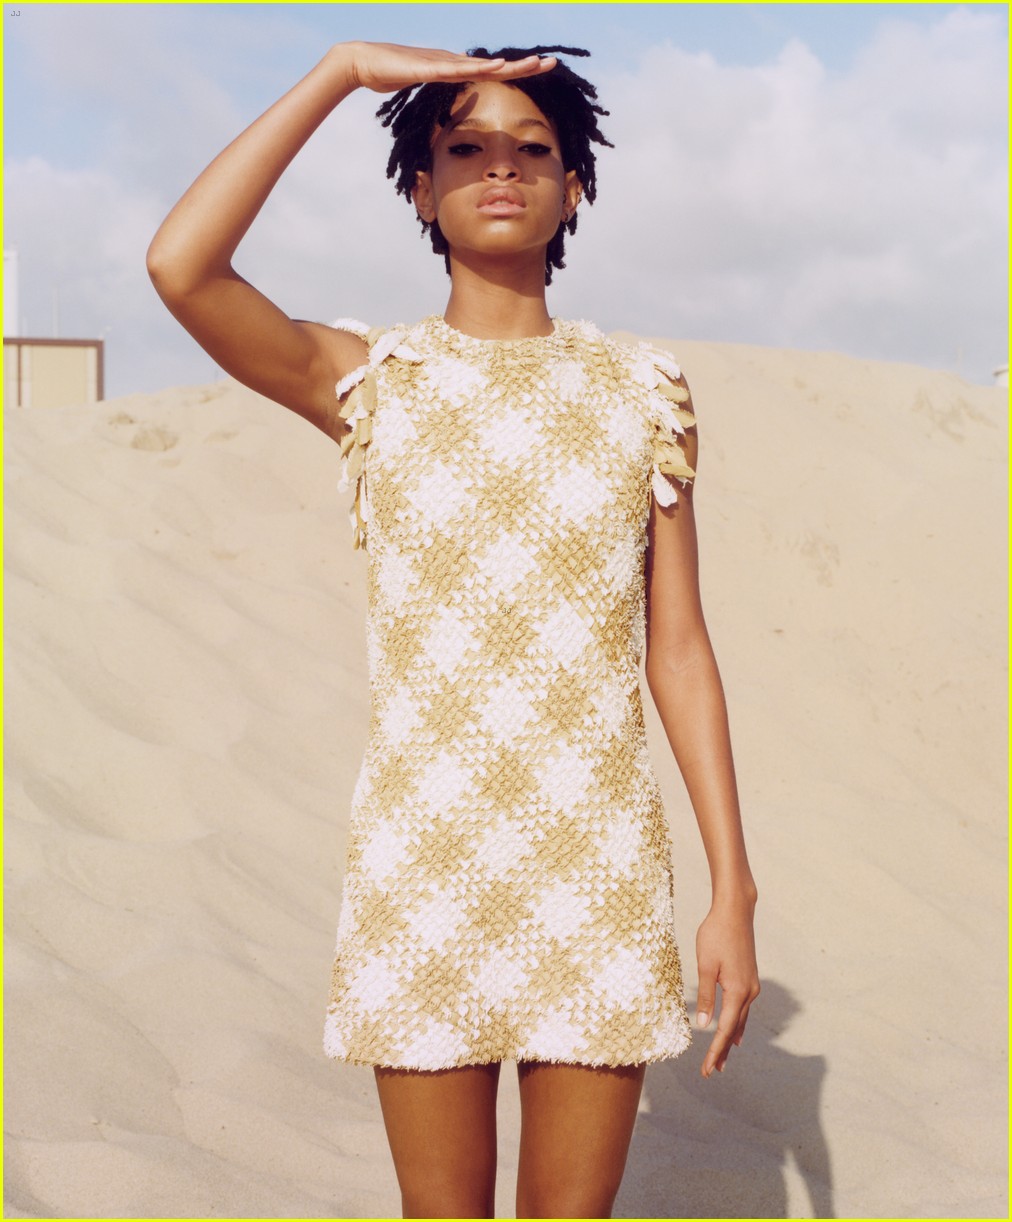 kylie jenner willow smith go high fashion for vogue 02